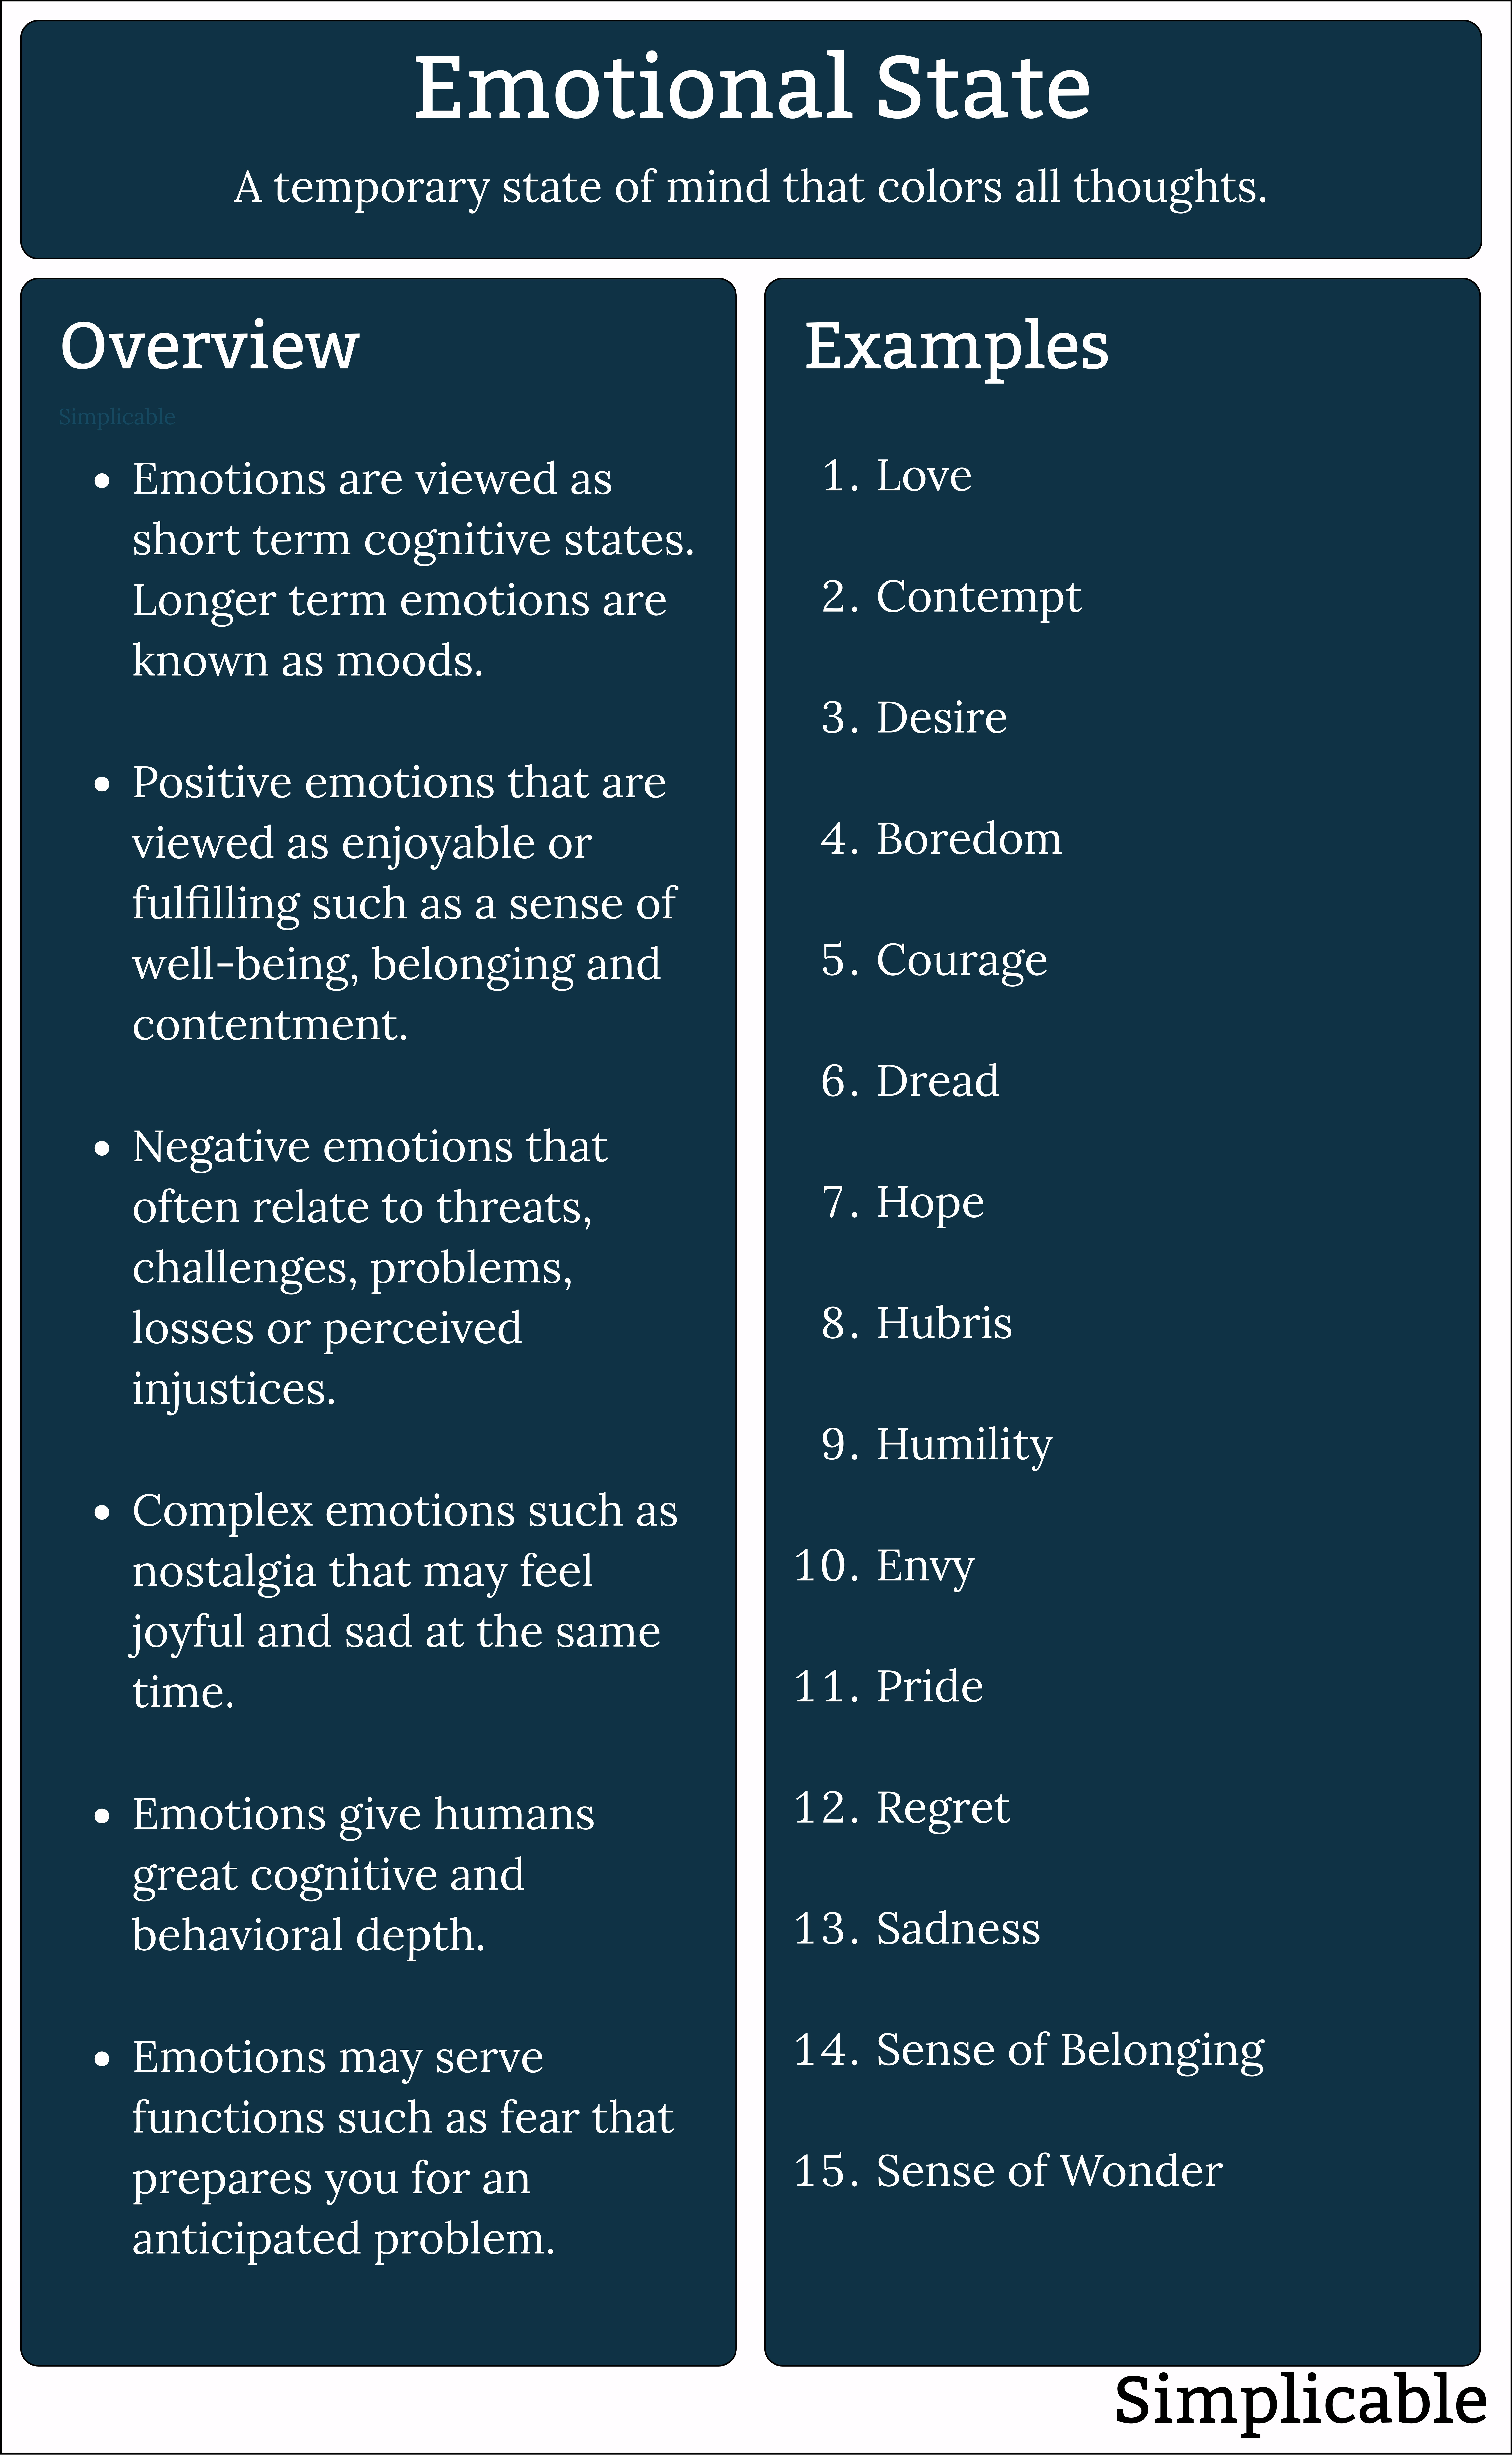 emotional states overview and examples